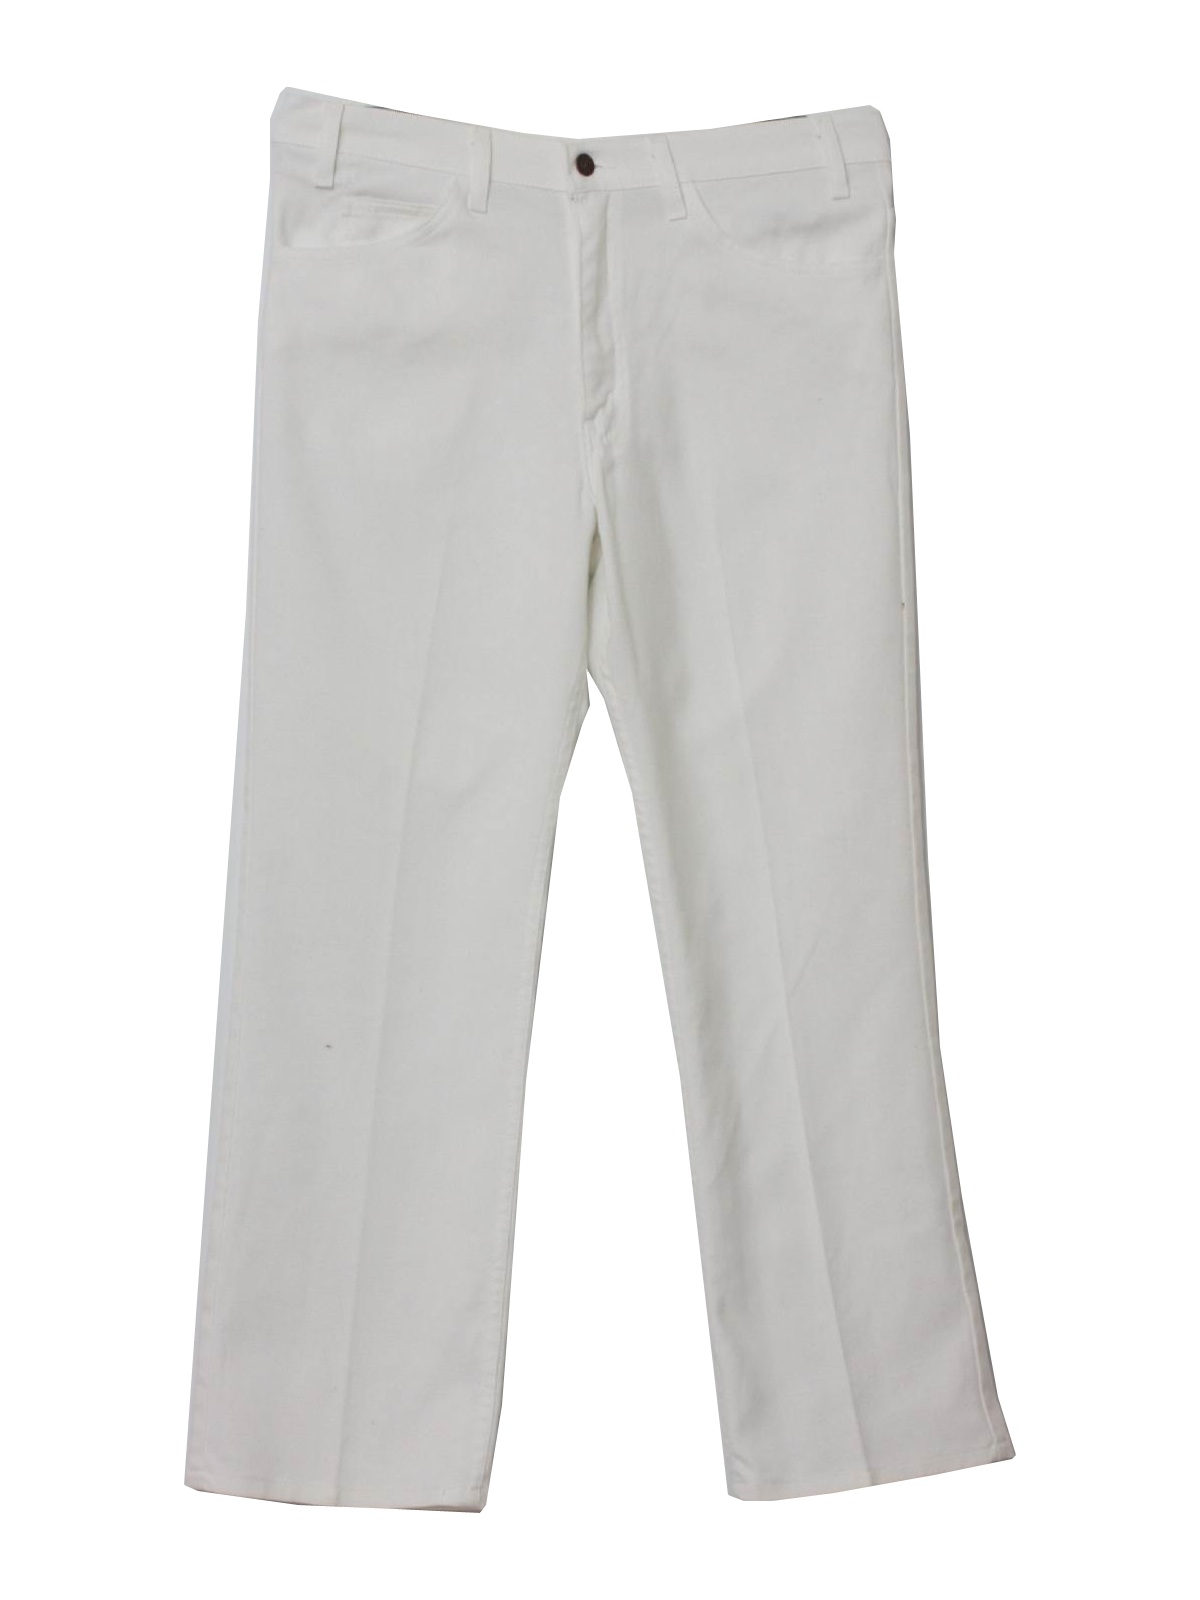 Retro Seventies Flared Pants / Flares: 70s -Levis Sta-Prest- Mens white ...